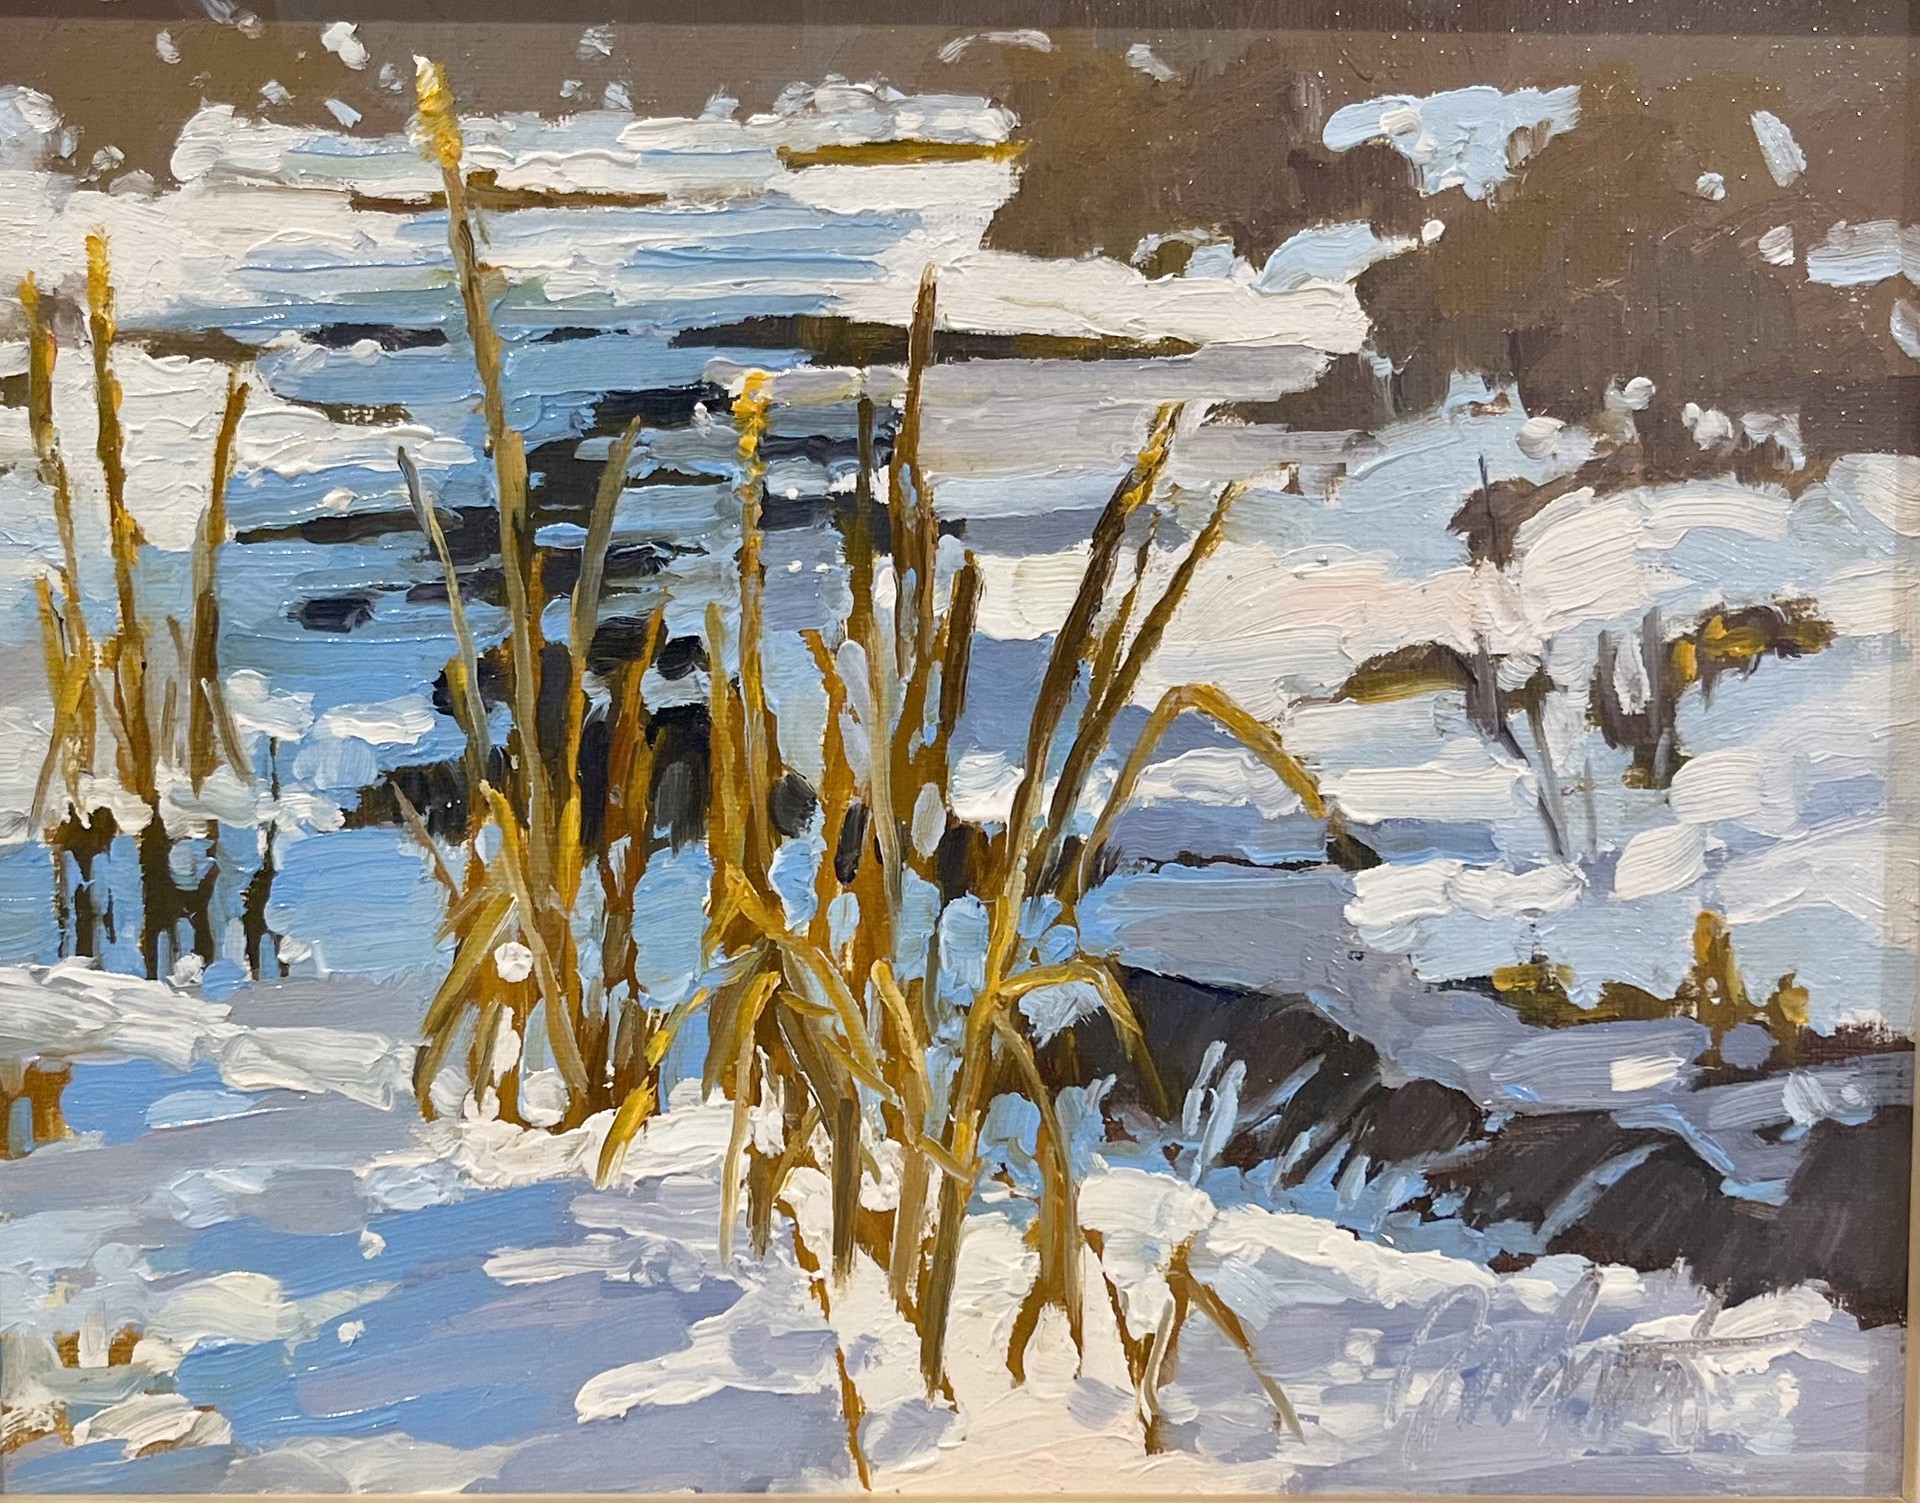 "Cattails" by Brian M. Smith